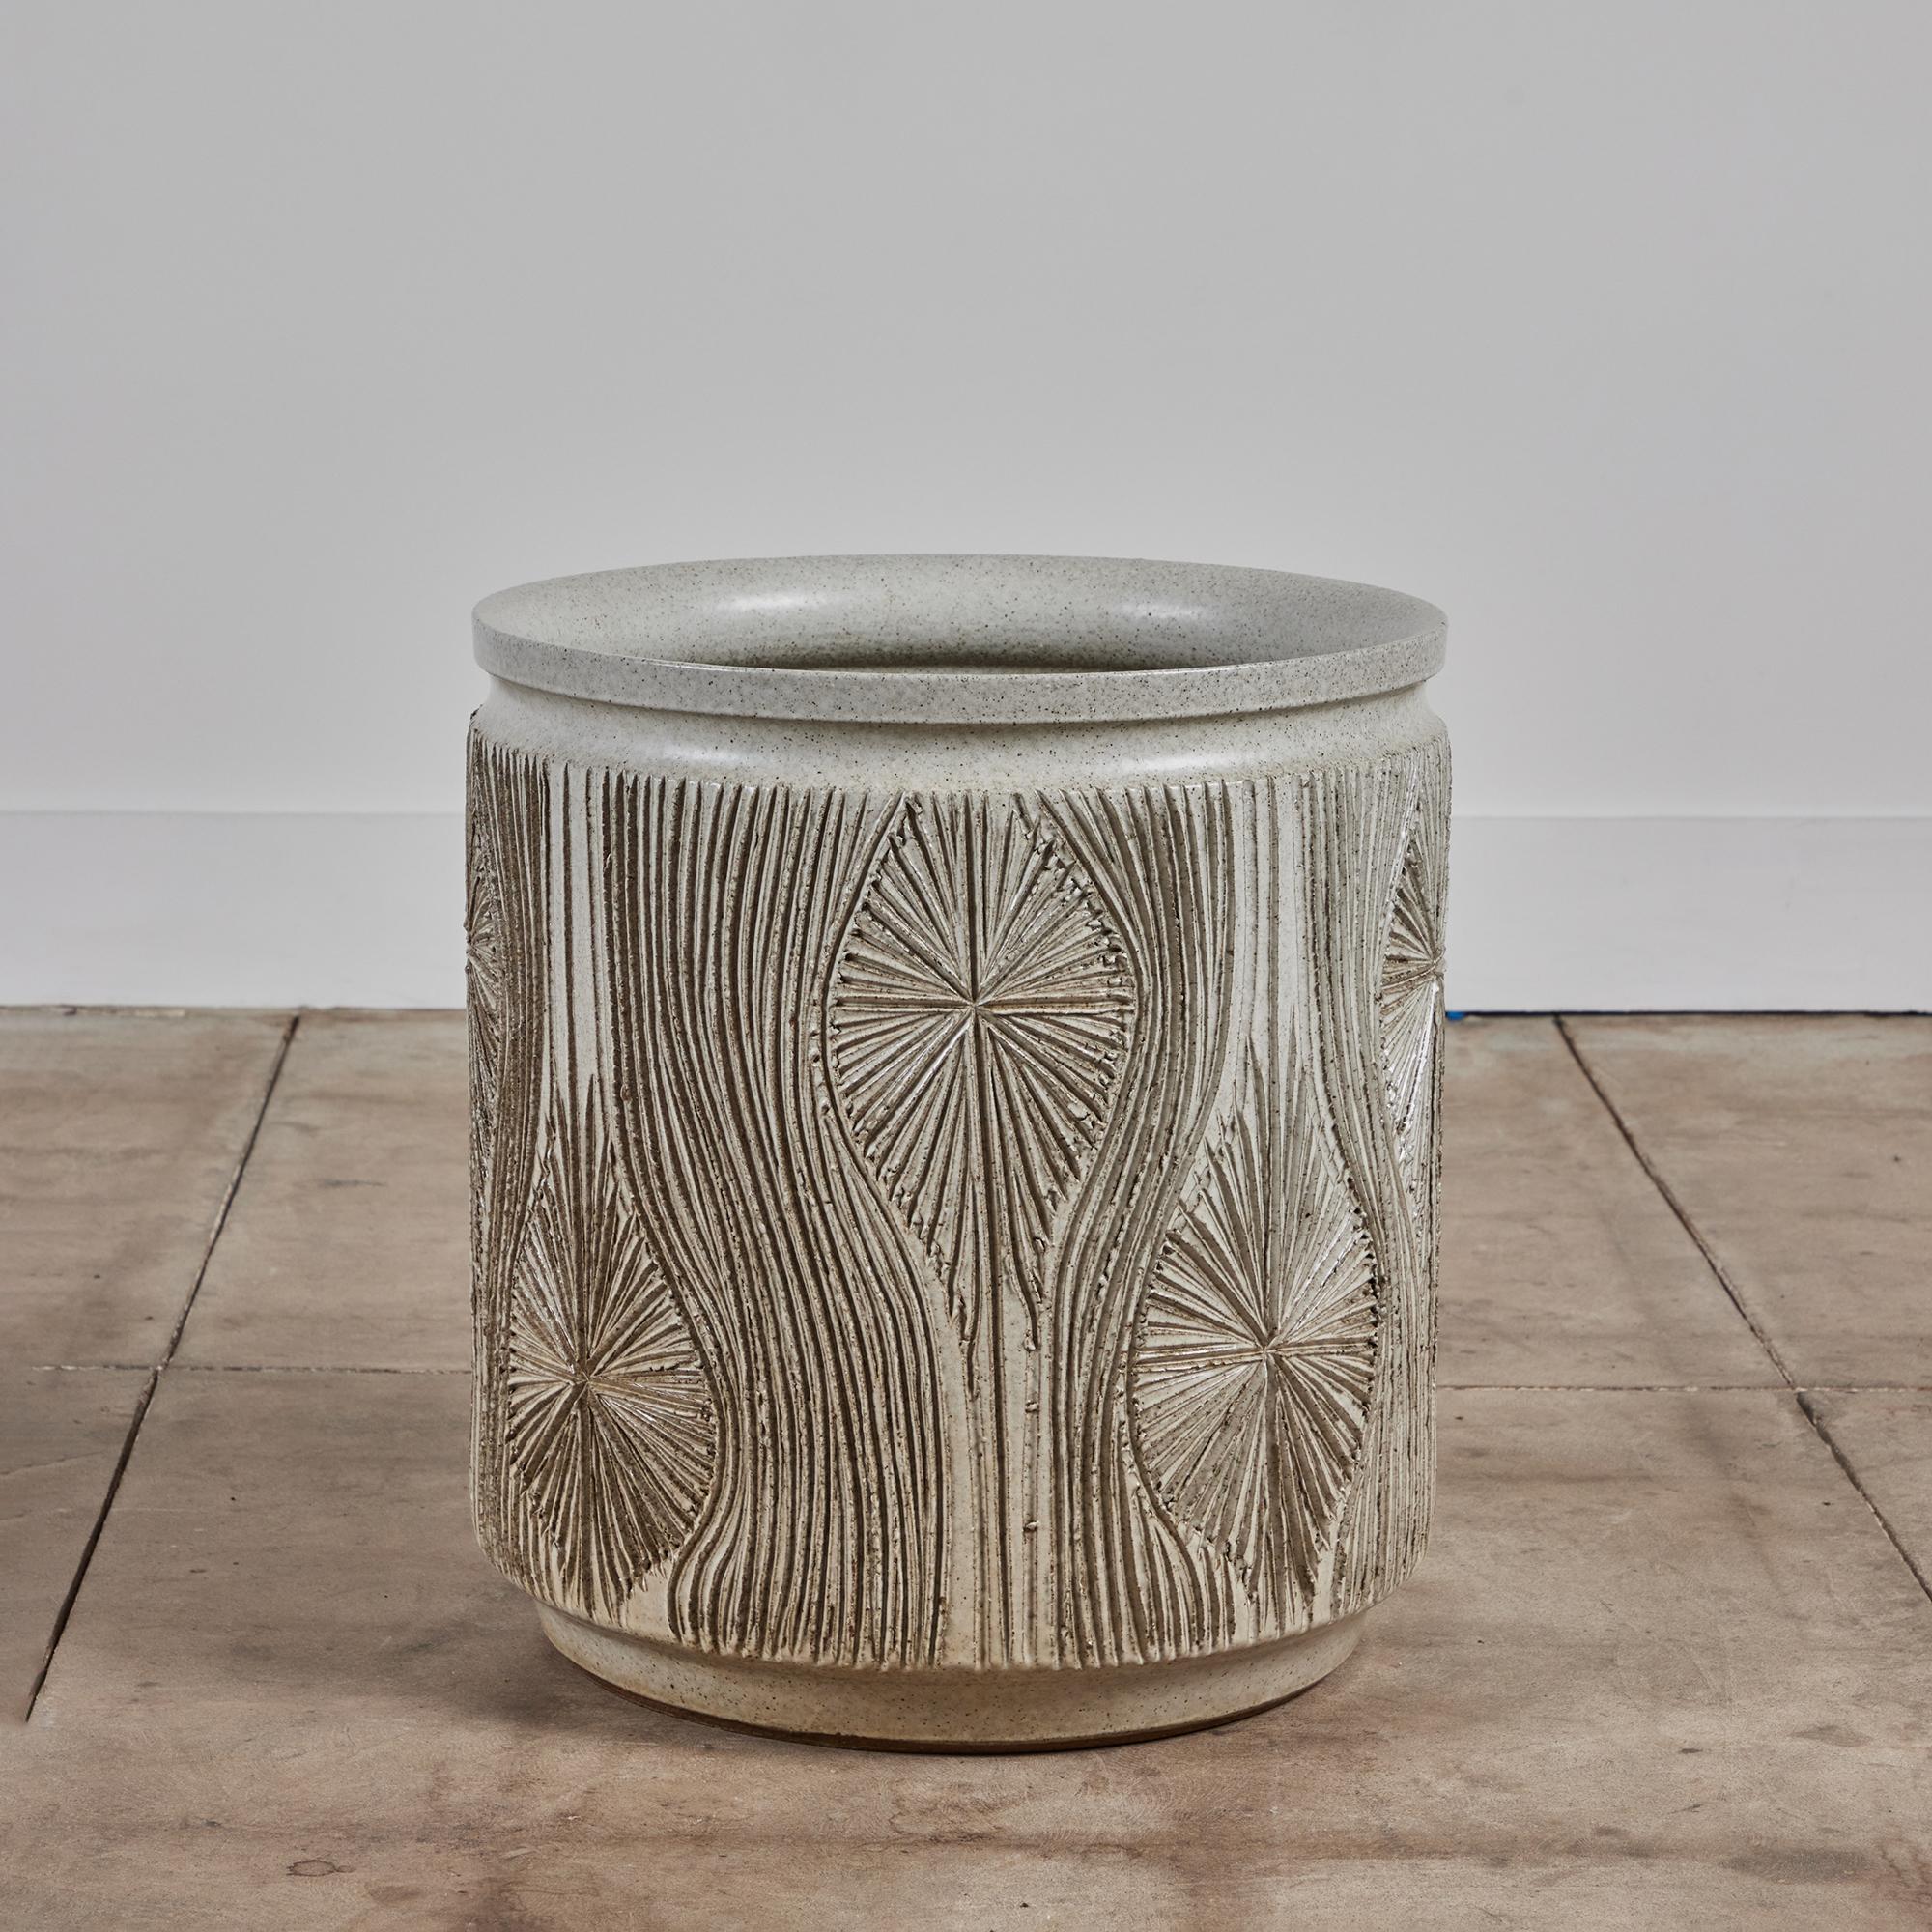 Cylindrical planter from Earthgender, David Cressey and Robert Maxwell’s early 1970s project. This 19” diameter example is incised in the “Teardrop Sunburst” design with interlocking gestural curves separating a pattern of lines radiating from a